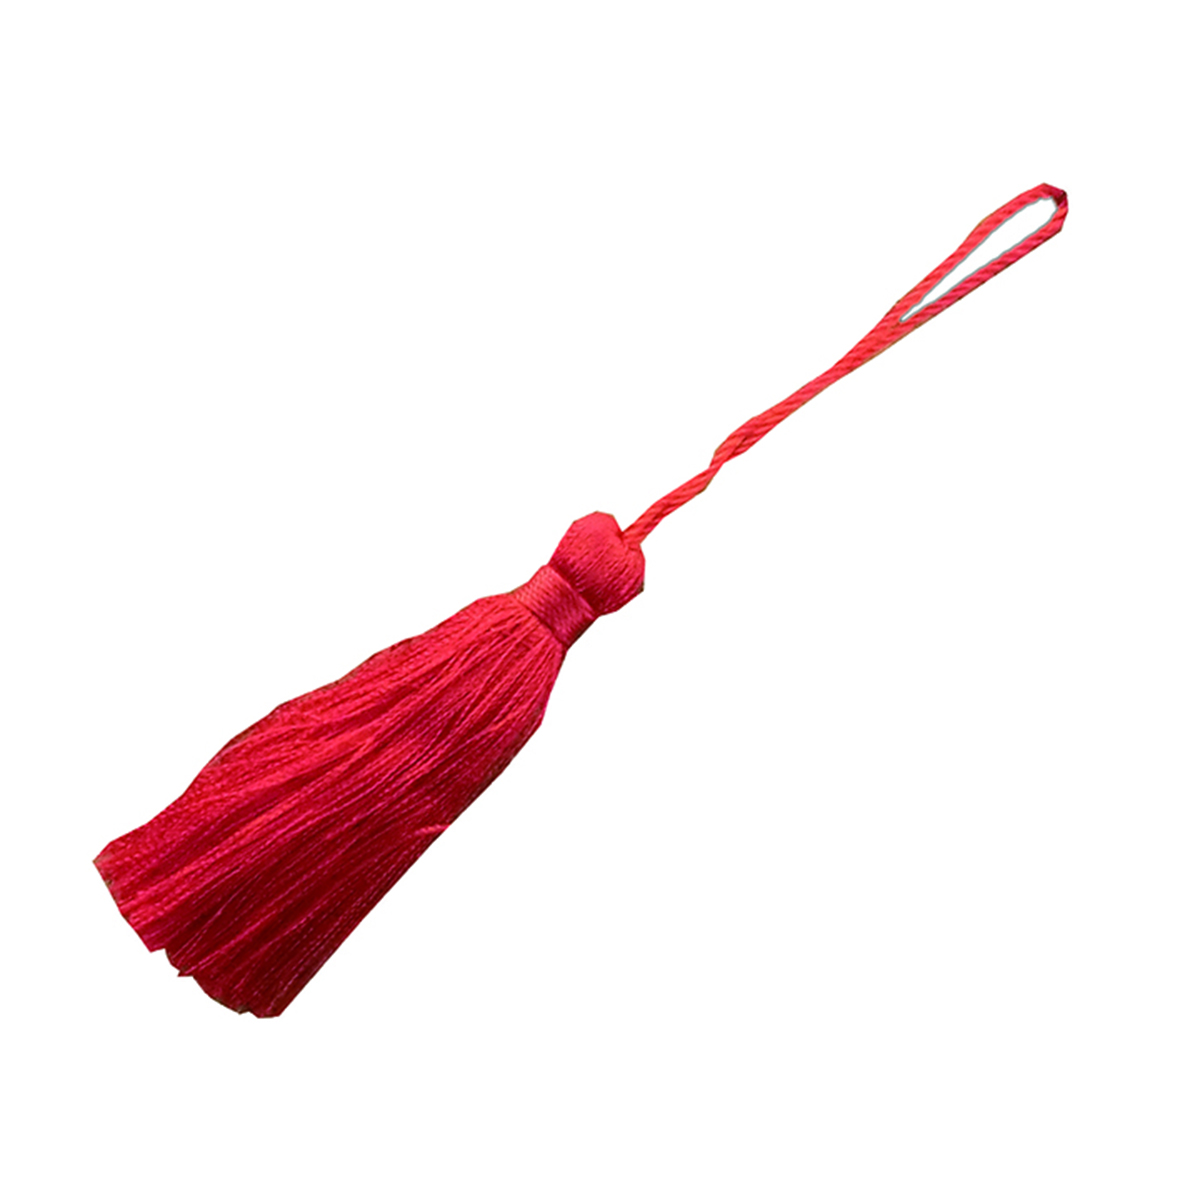 Tassel (medium) red 10 pieces made in Japan Chikyuya hanging decoration accessory lucky decoration